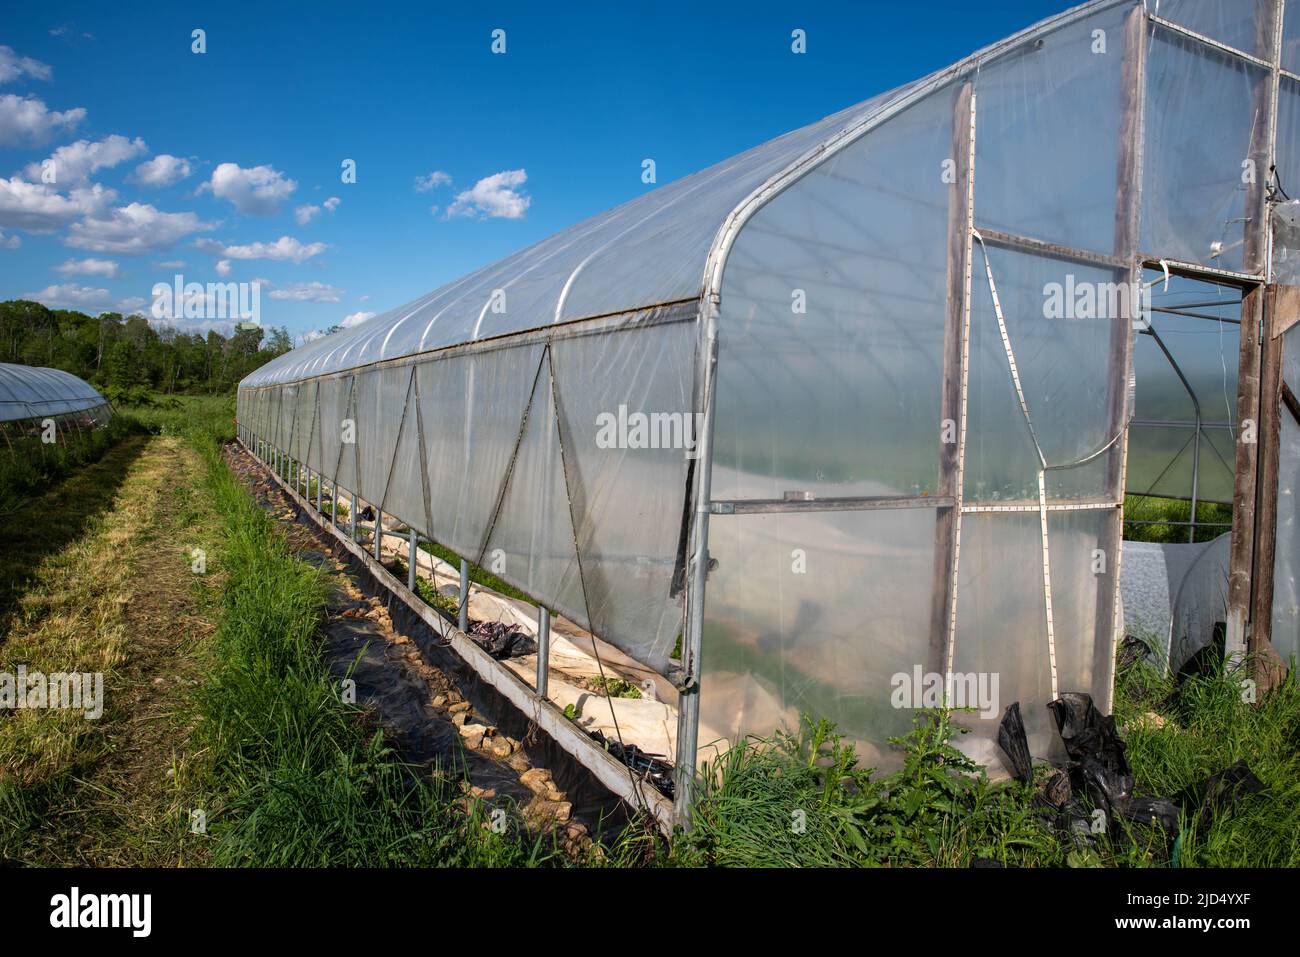 Green grass and blue sky with a long side view of an organic vegetable greenhouse with rows of covered plants visible inside under garden fabric hoop Stock Photo